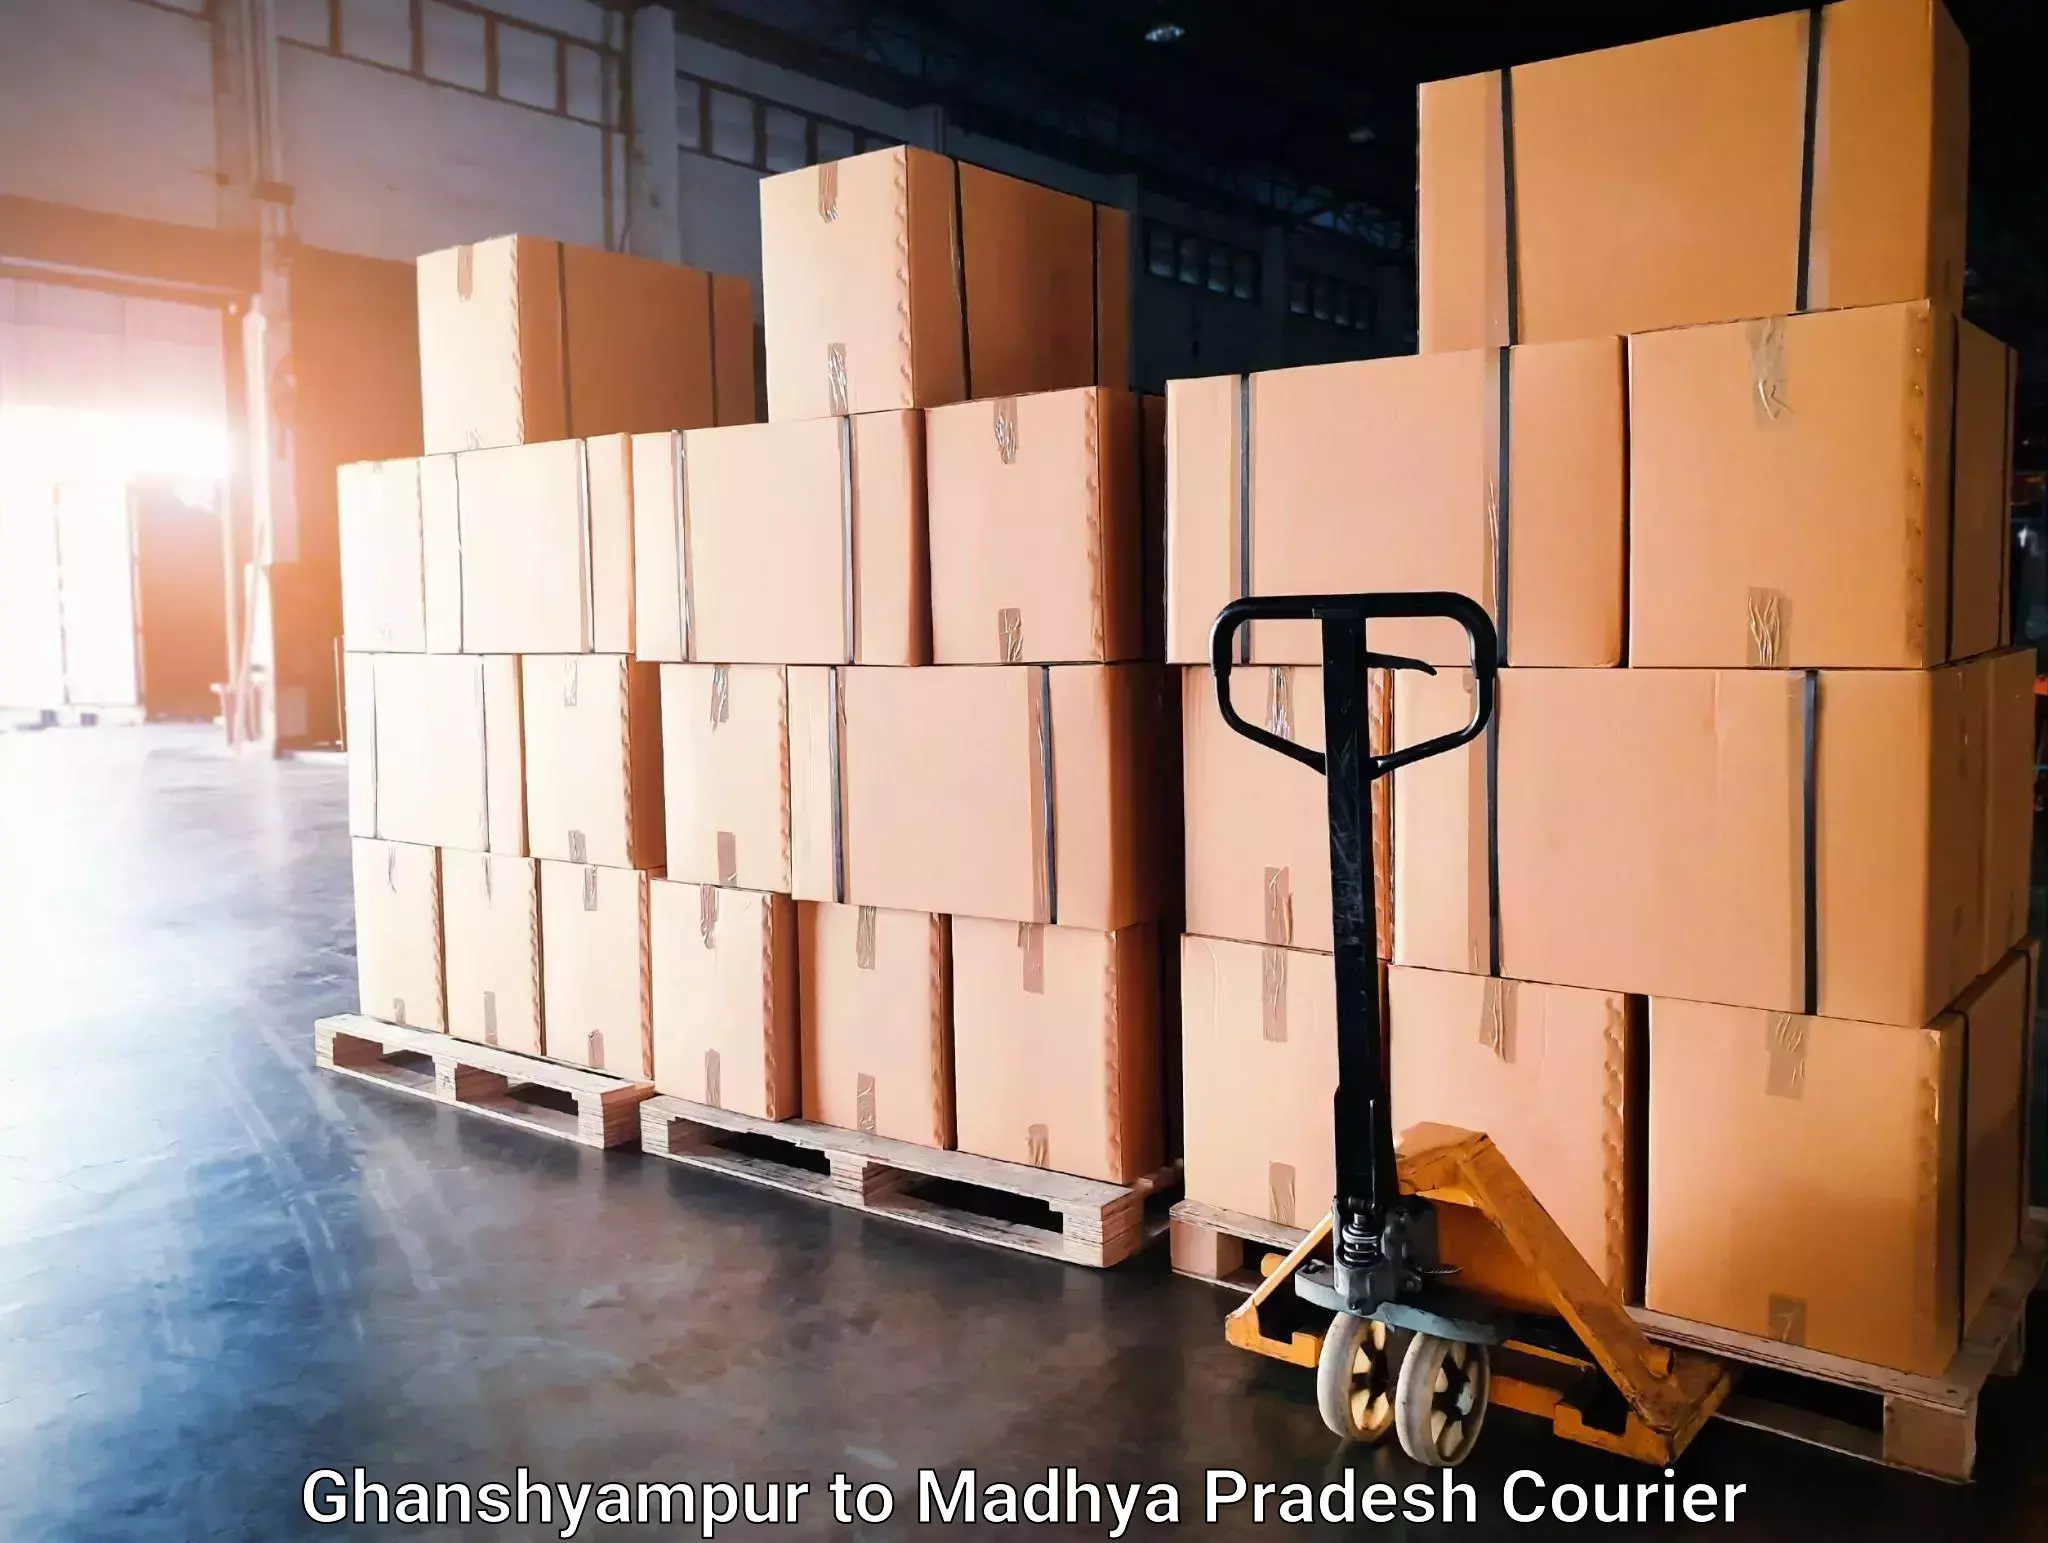 Trusted relocation experts Ghanshyampur to Lavkush Nagar